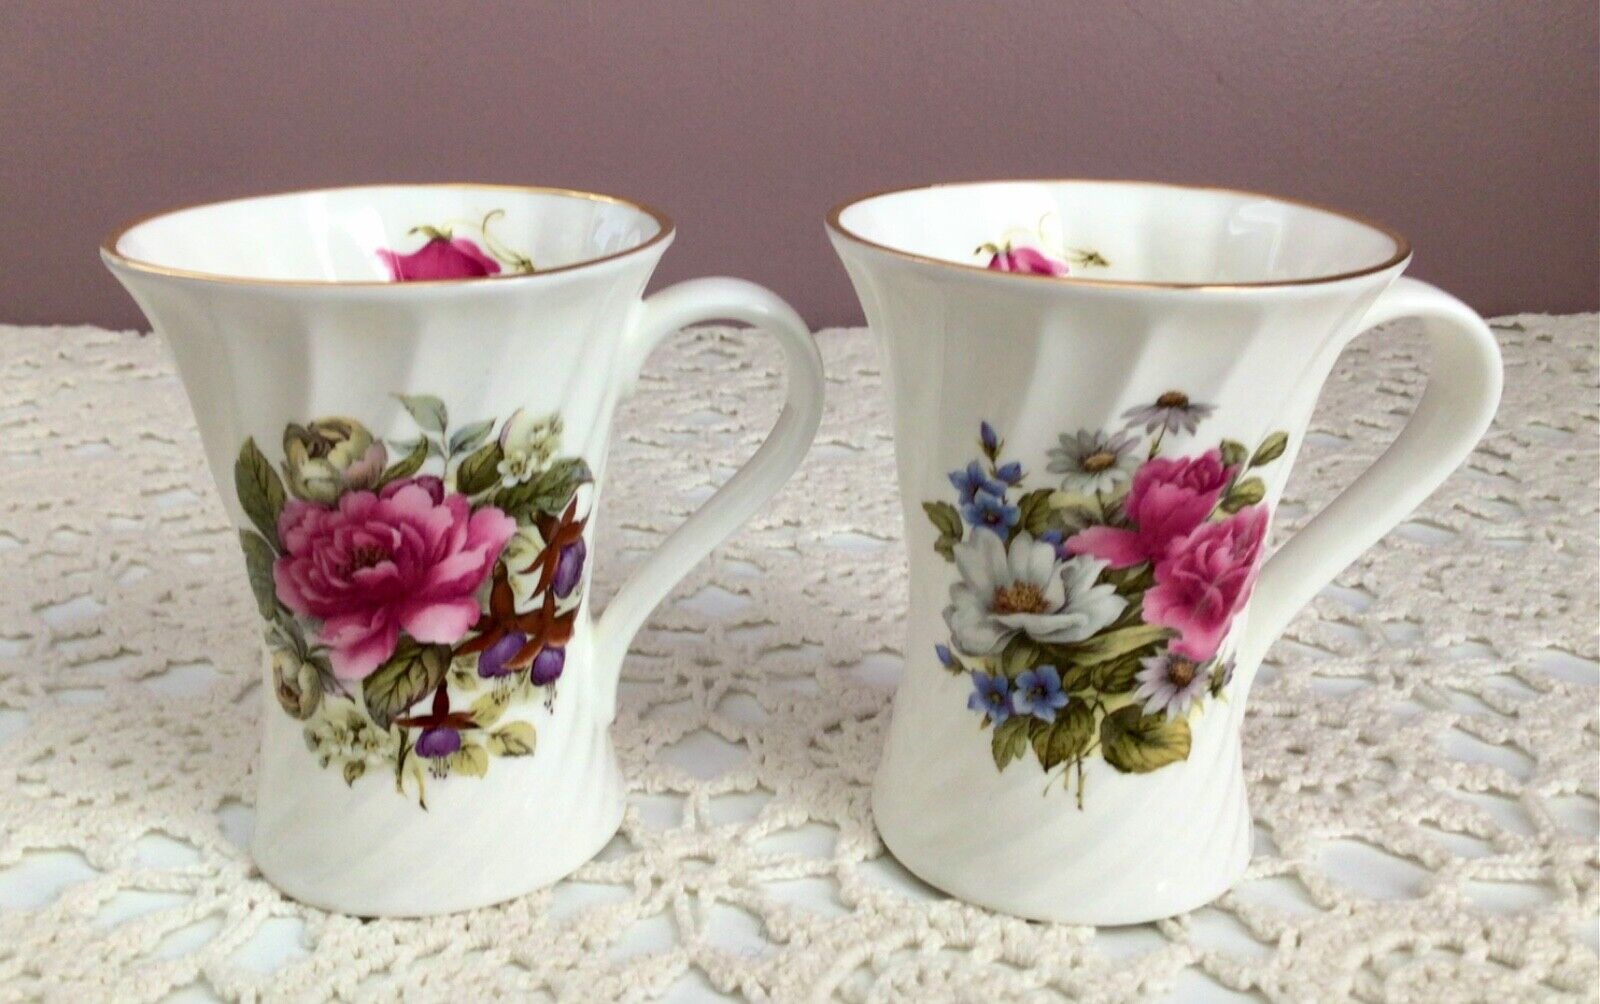 Royale Garden Staffs England Fine China (2) Floral Tea Coffee Cups Roses Daisies